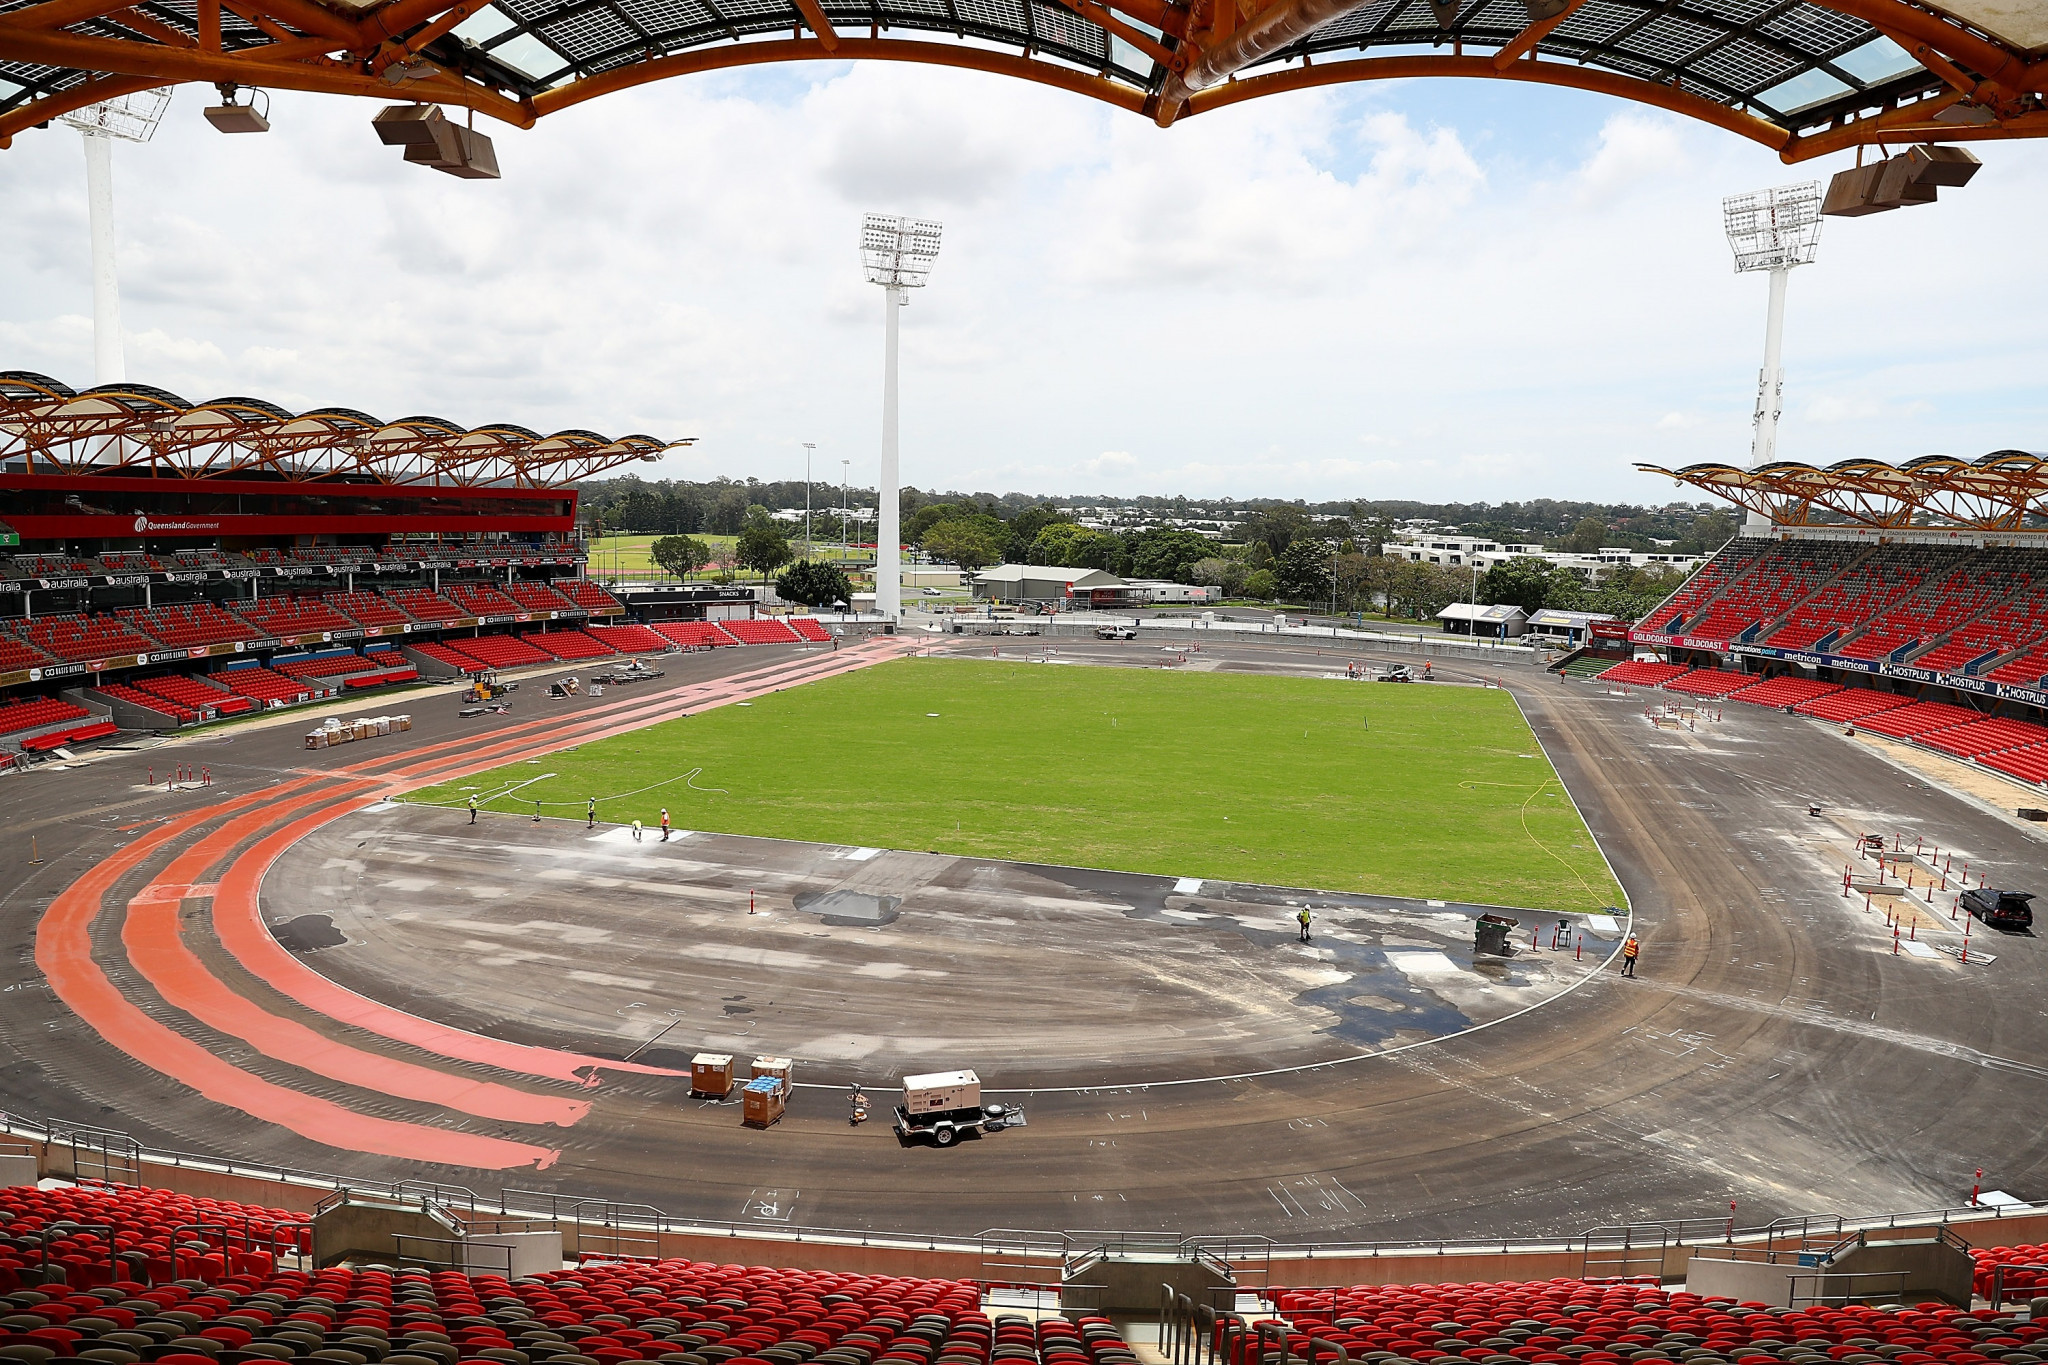 The Carrara Stadium will play host to the Gold Coast 2018 Opening and Closing Ceremonies ©Getty Images